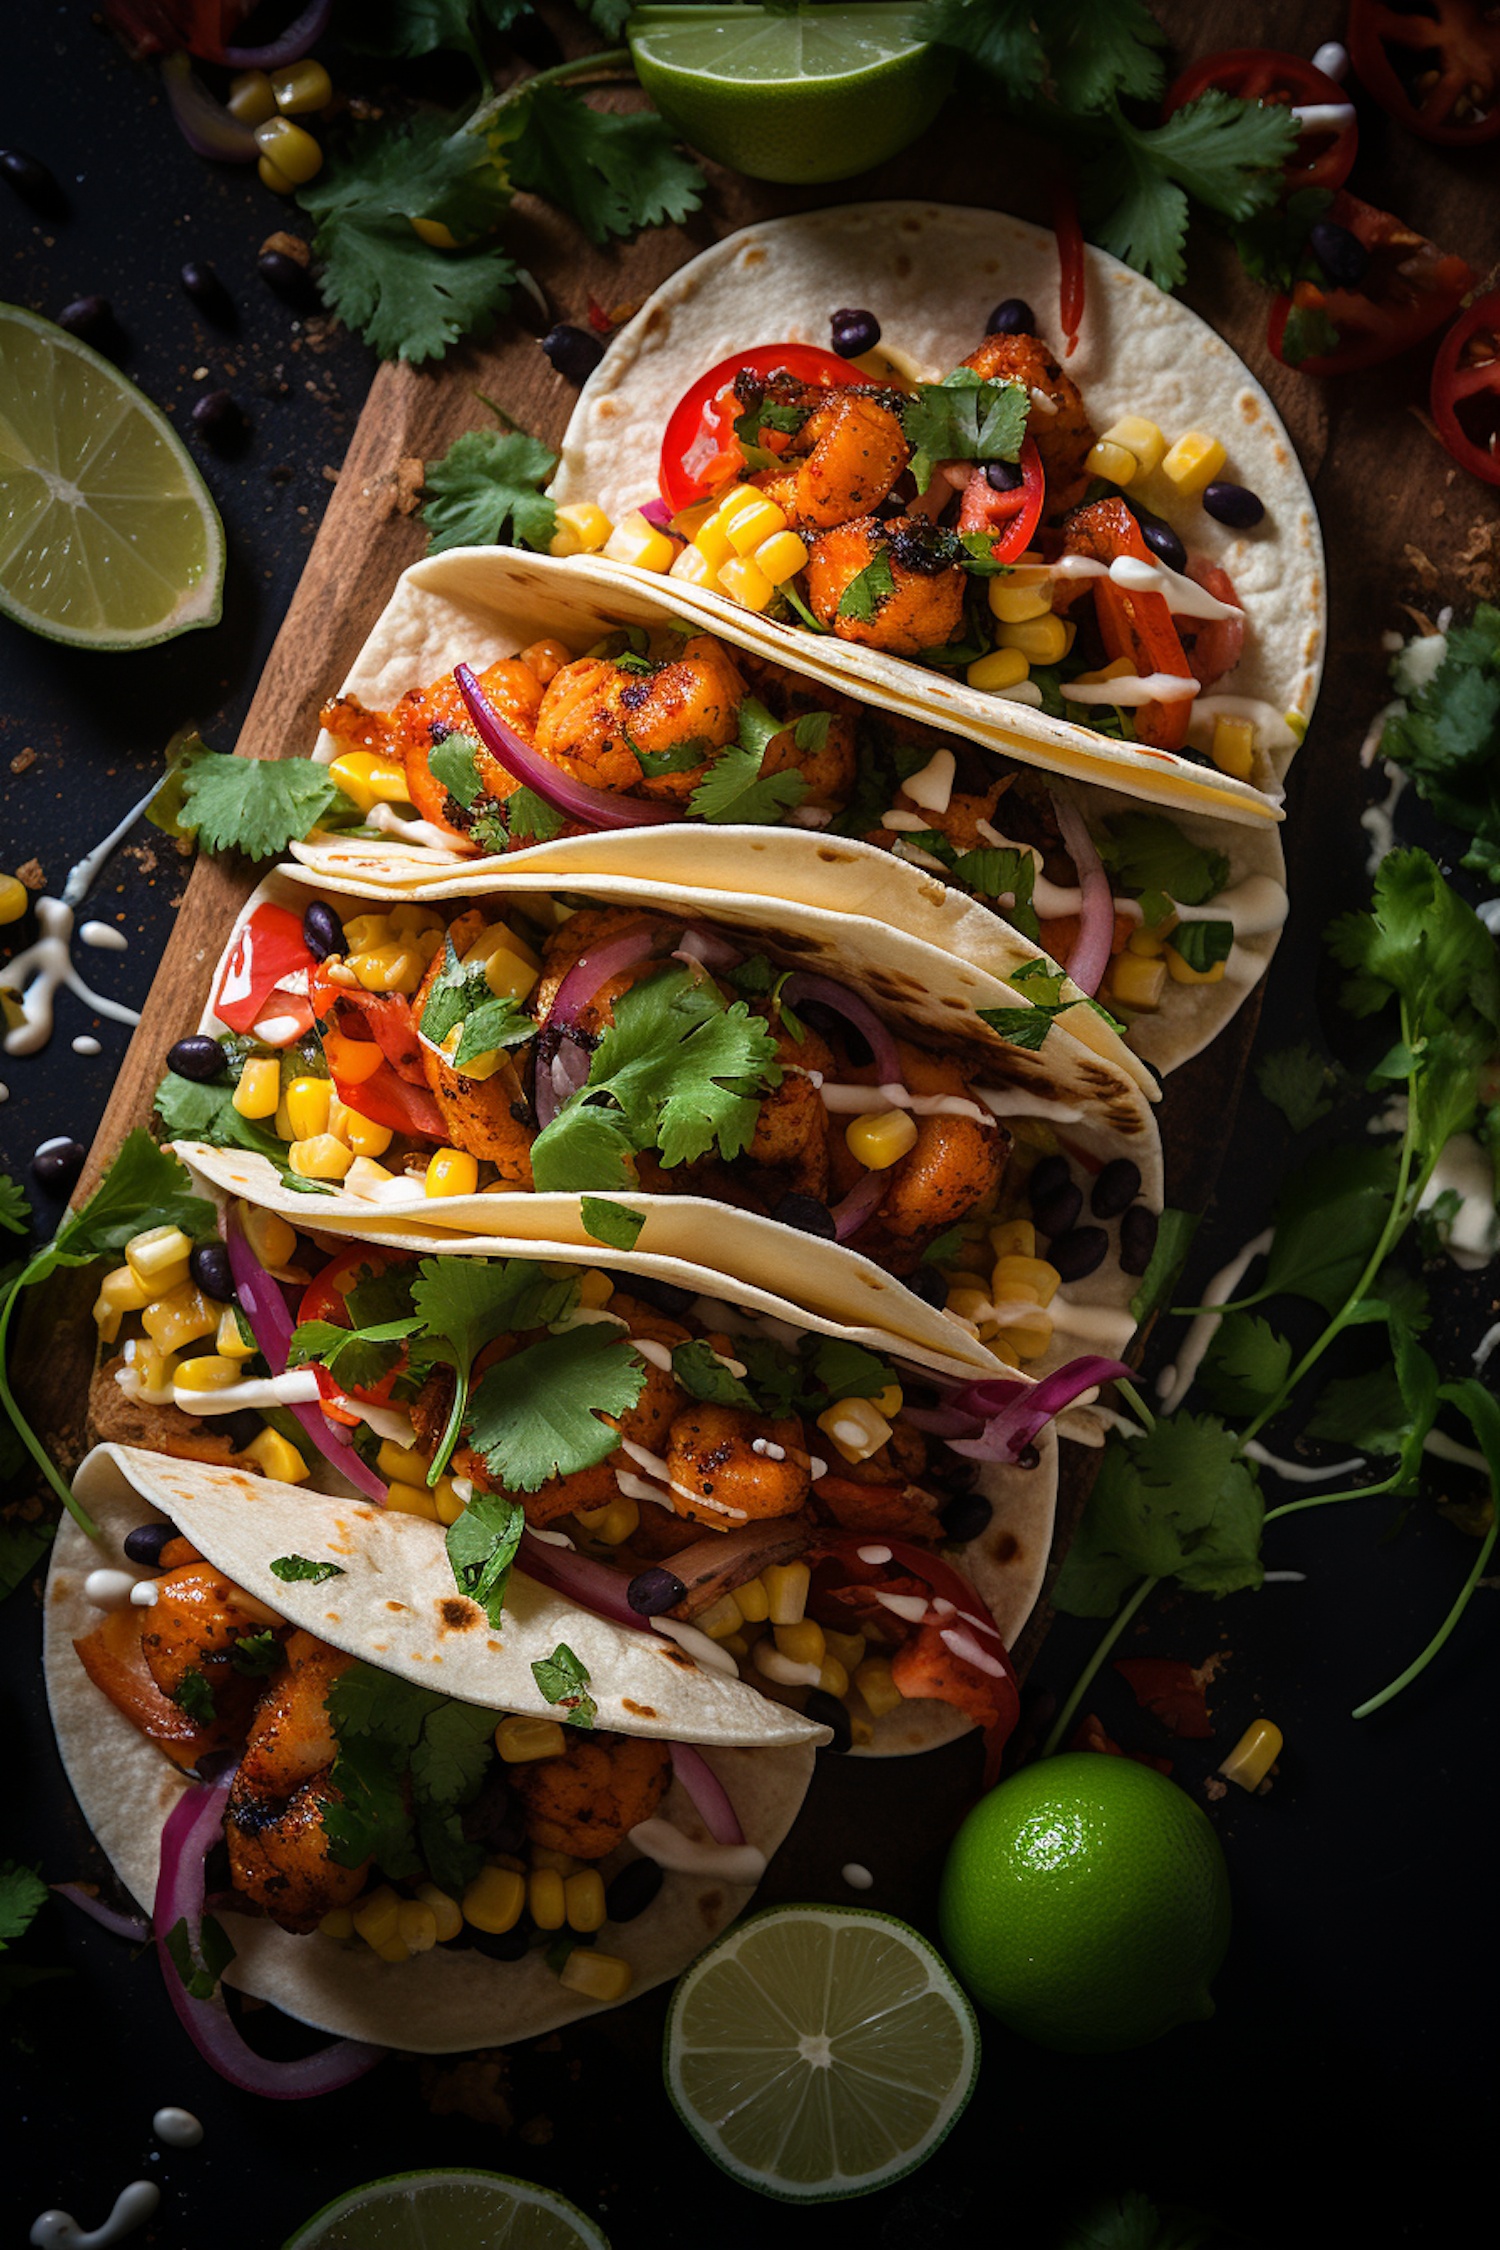 Savory Charred Corn and Shrimp Tacos with Fresh Vegetables and Creamy Sauce